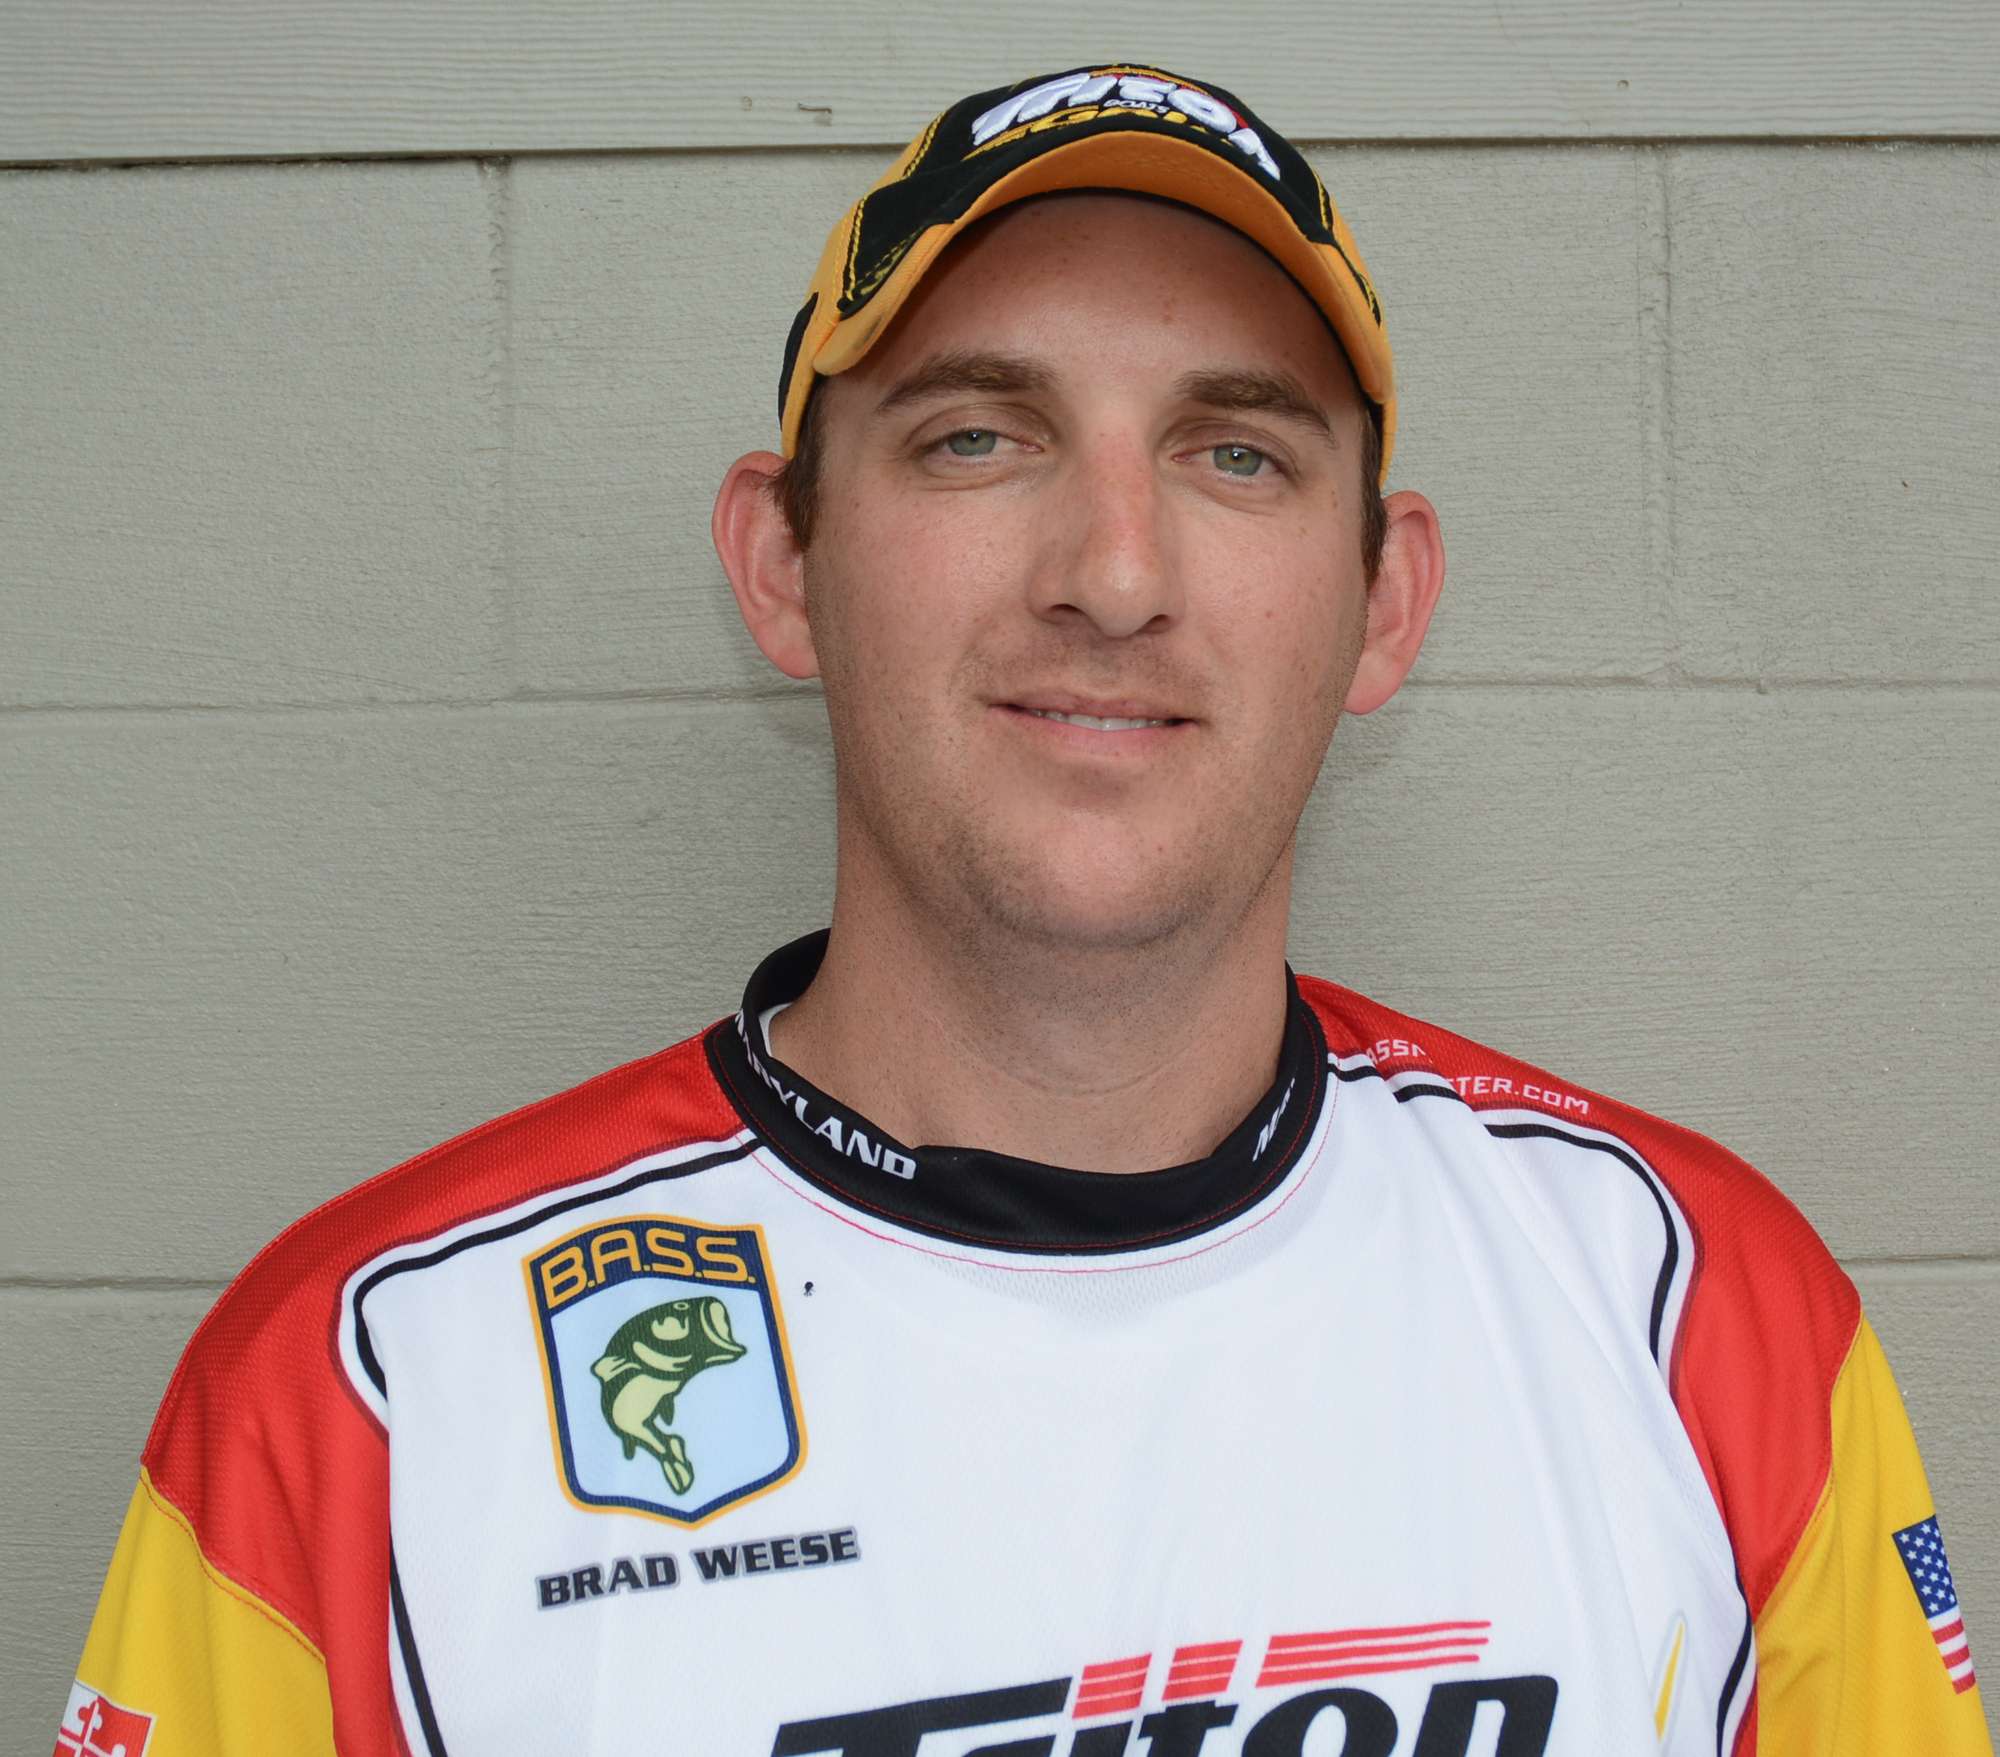 Brad Weese will be representing Maryland in the championship, and he'll be a first-timer. He's a real estate contractor, and he loves hanging out with family and friends and doing just about anything in the outdoors. He's a member of the Garrett Bassers.